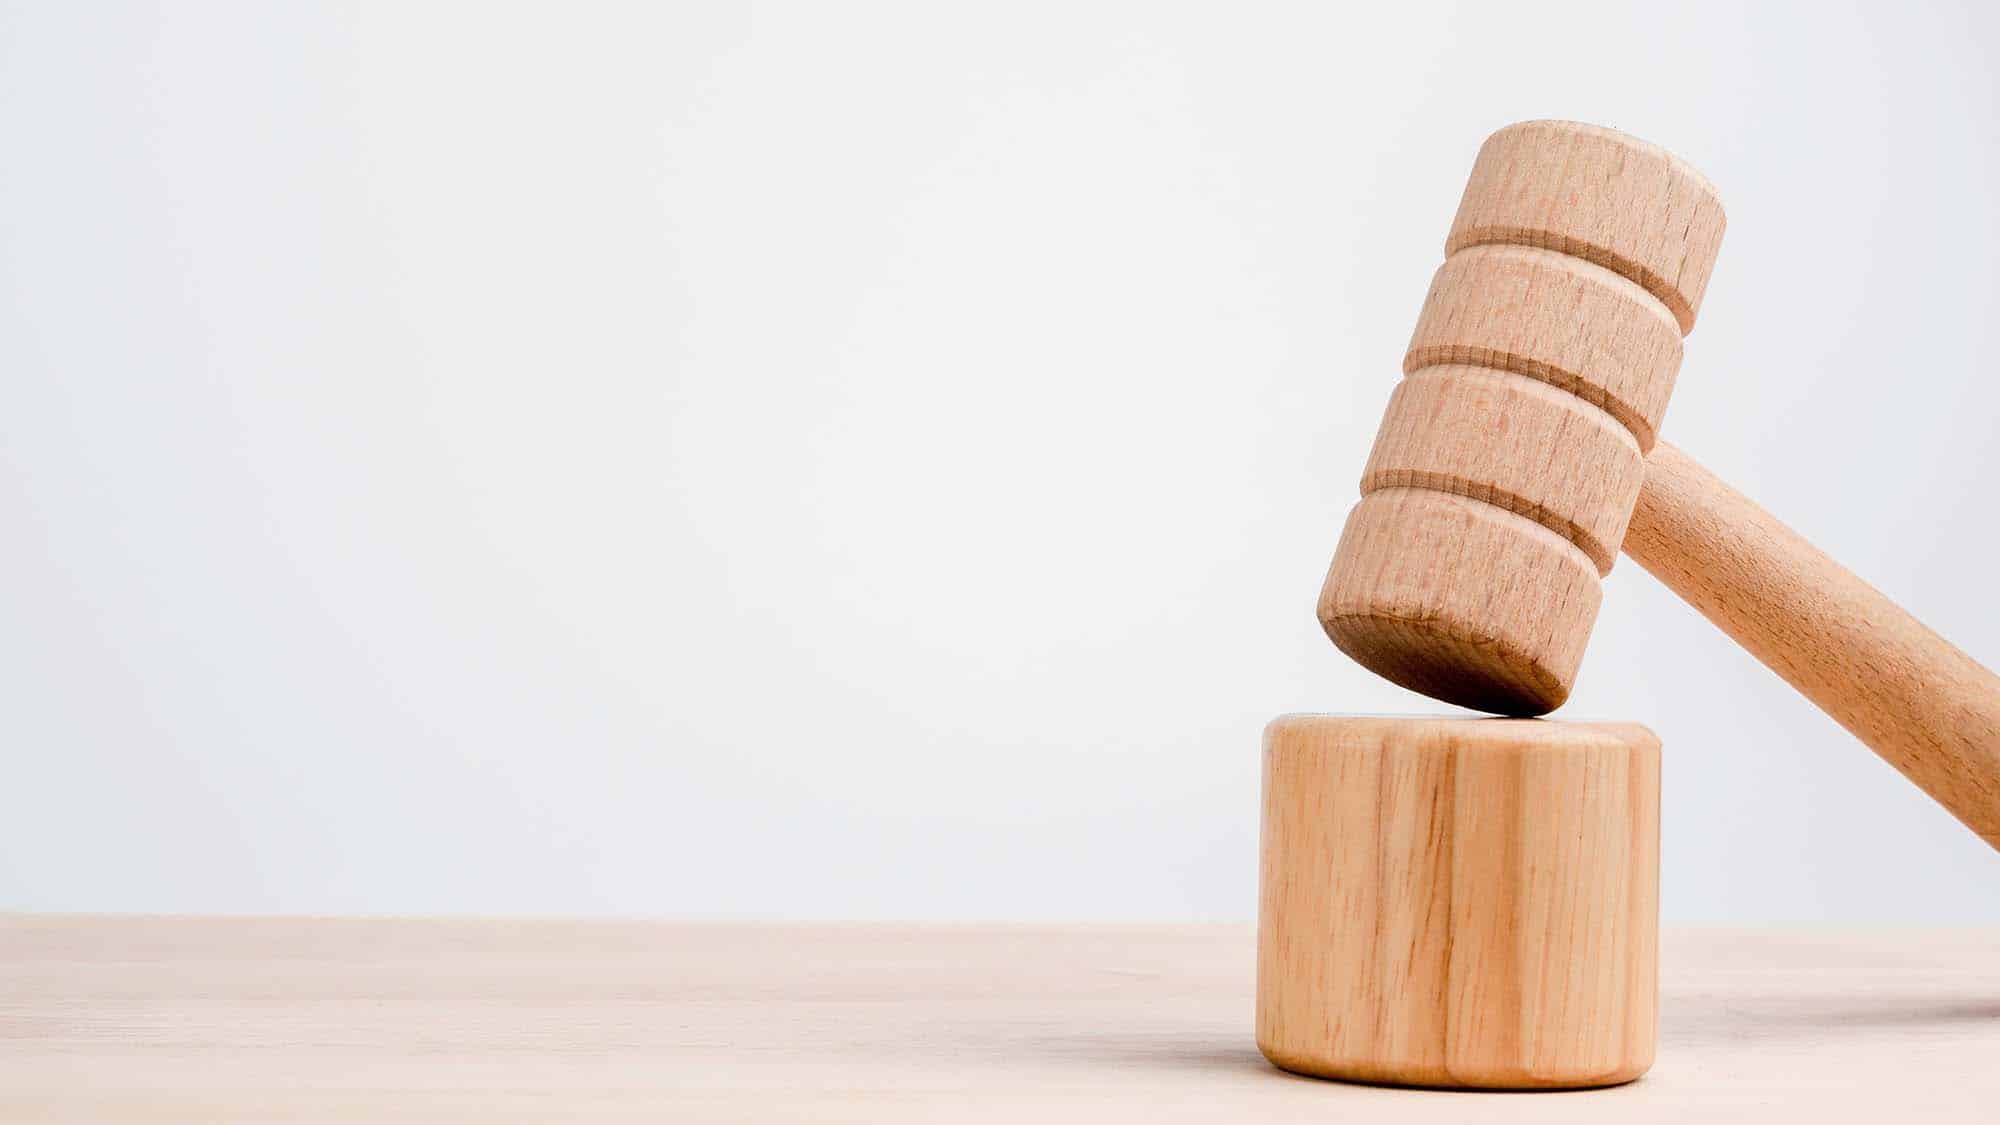 Law and legal industry image featuring wooden gavel